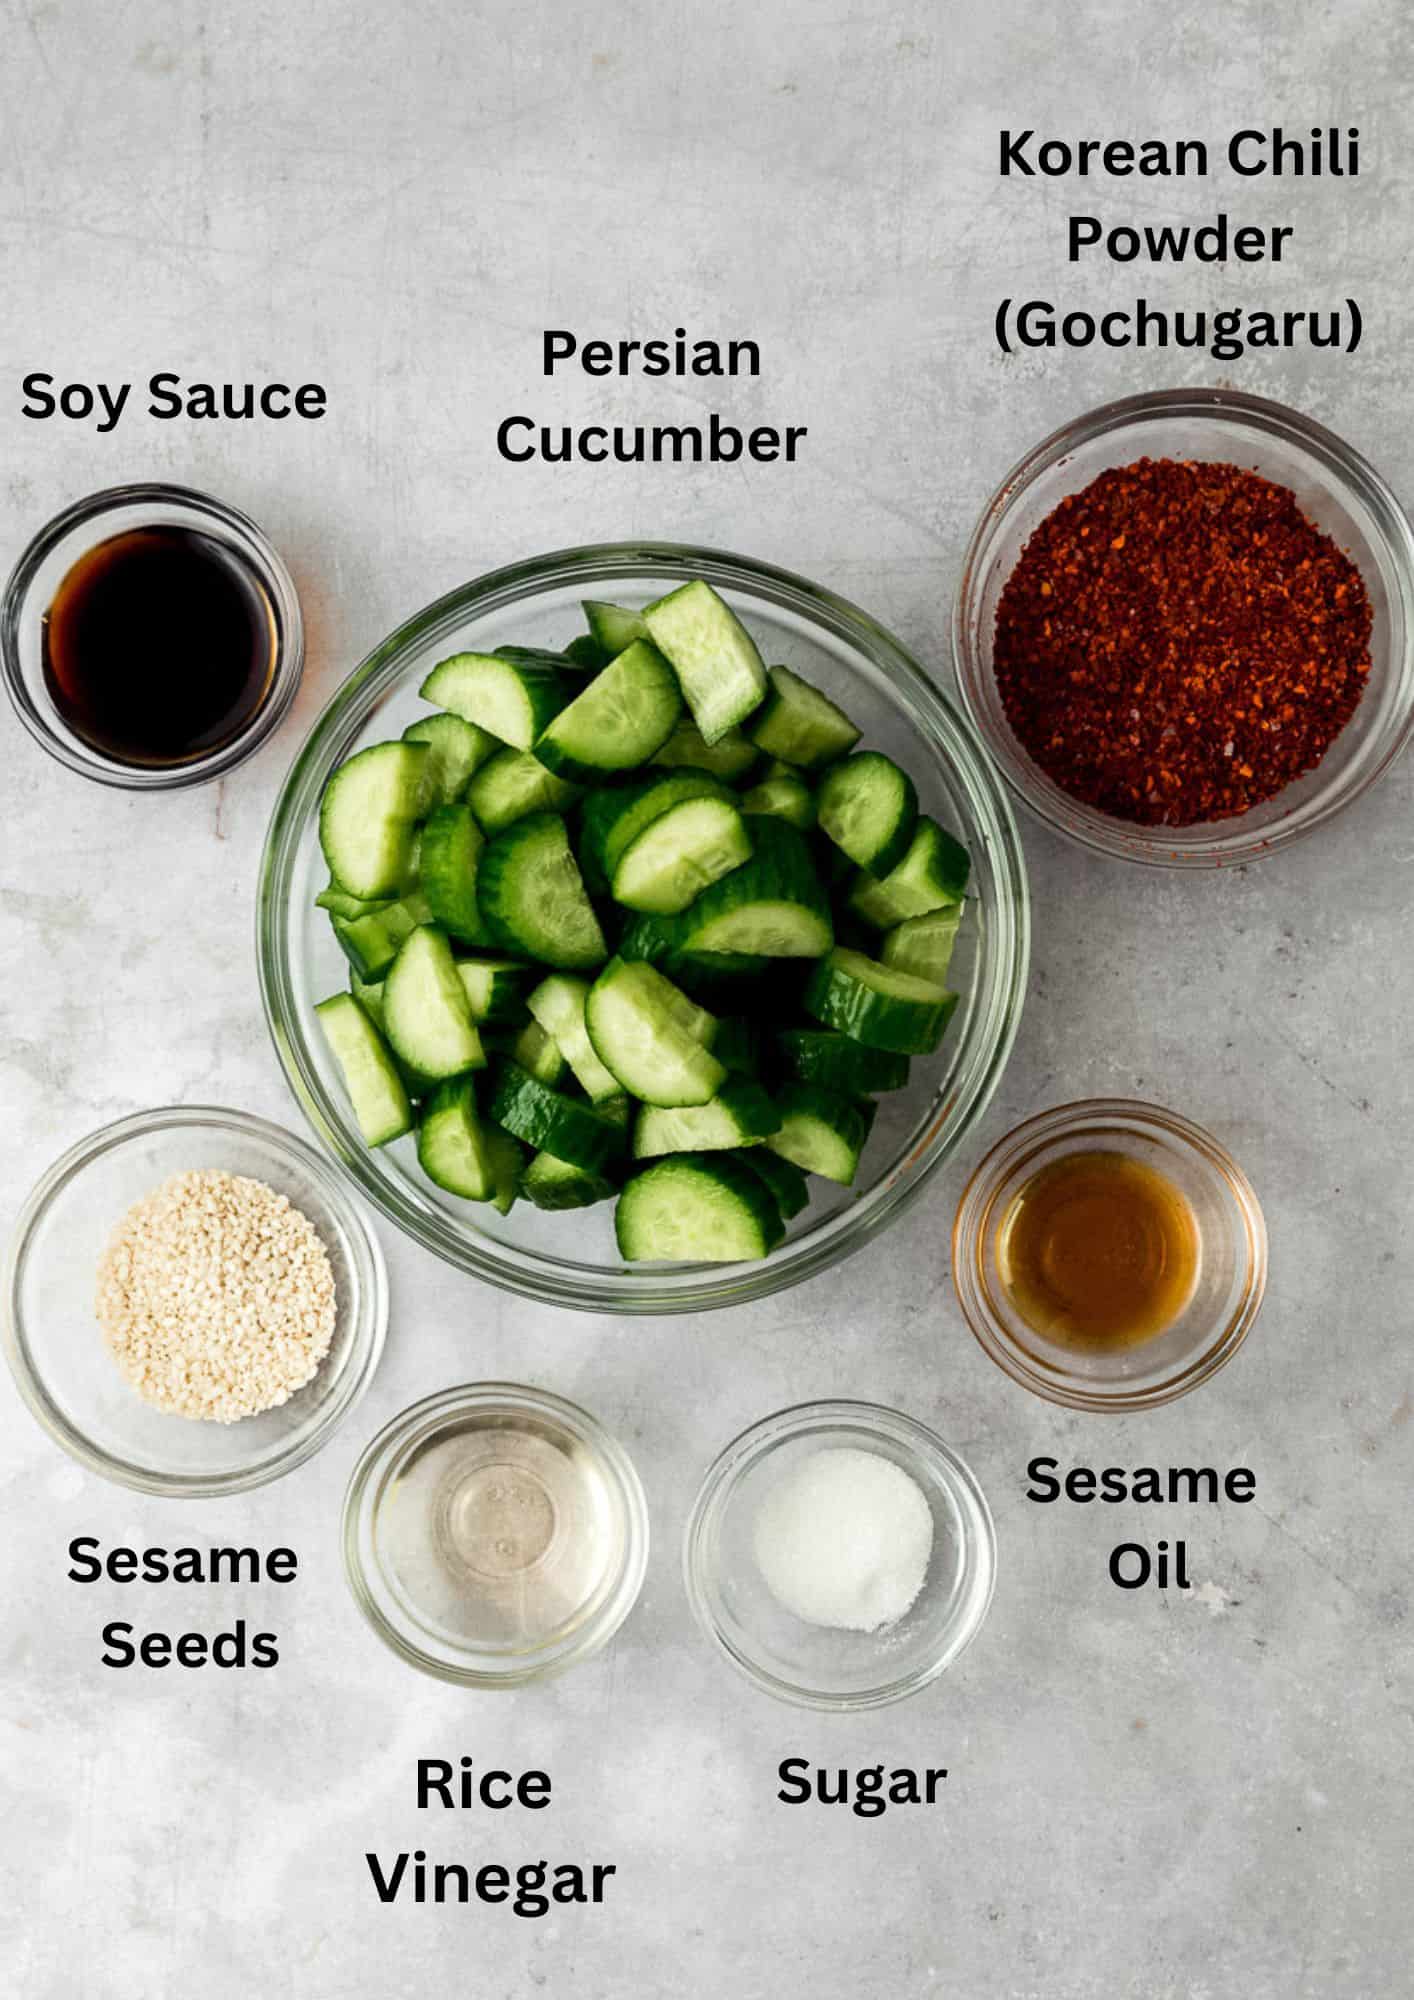 Ingredients for spicy Korean cucumber salad, including Korean red pepper, soy sauce and sesame oil.